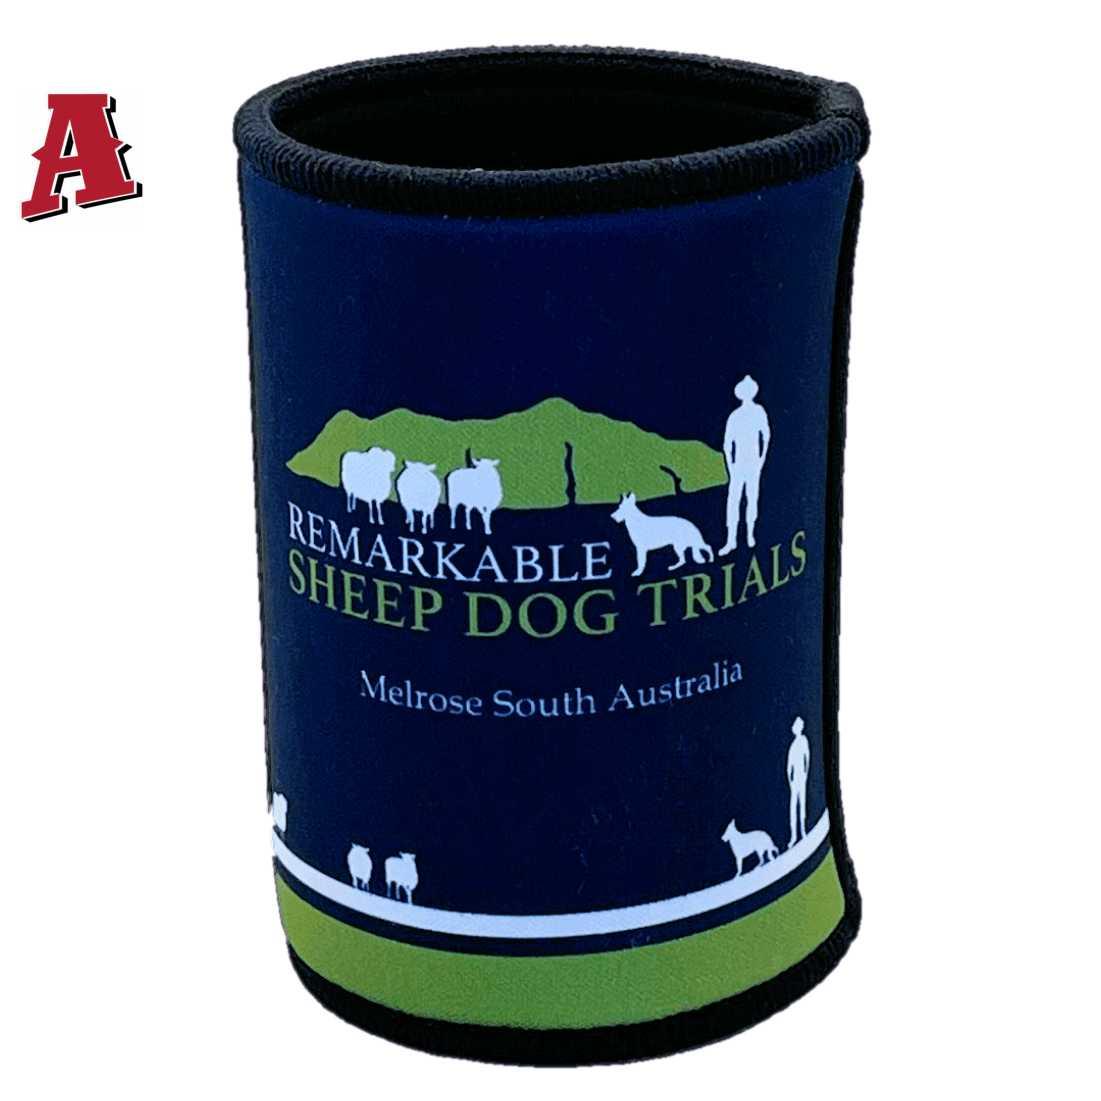 Remarkable Sheep Dog Trials Melrose SA Aussie Custom Stubby Holders - Koozie - 5mm Premium Neoprene with Taped and Stitched Seams Navy